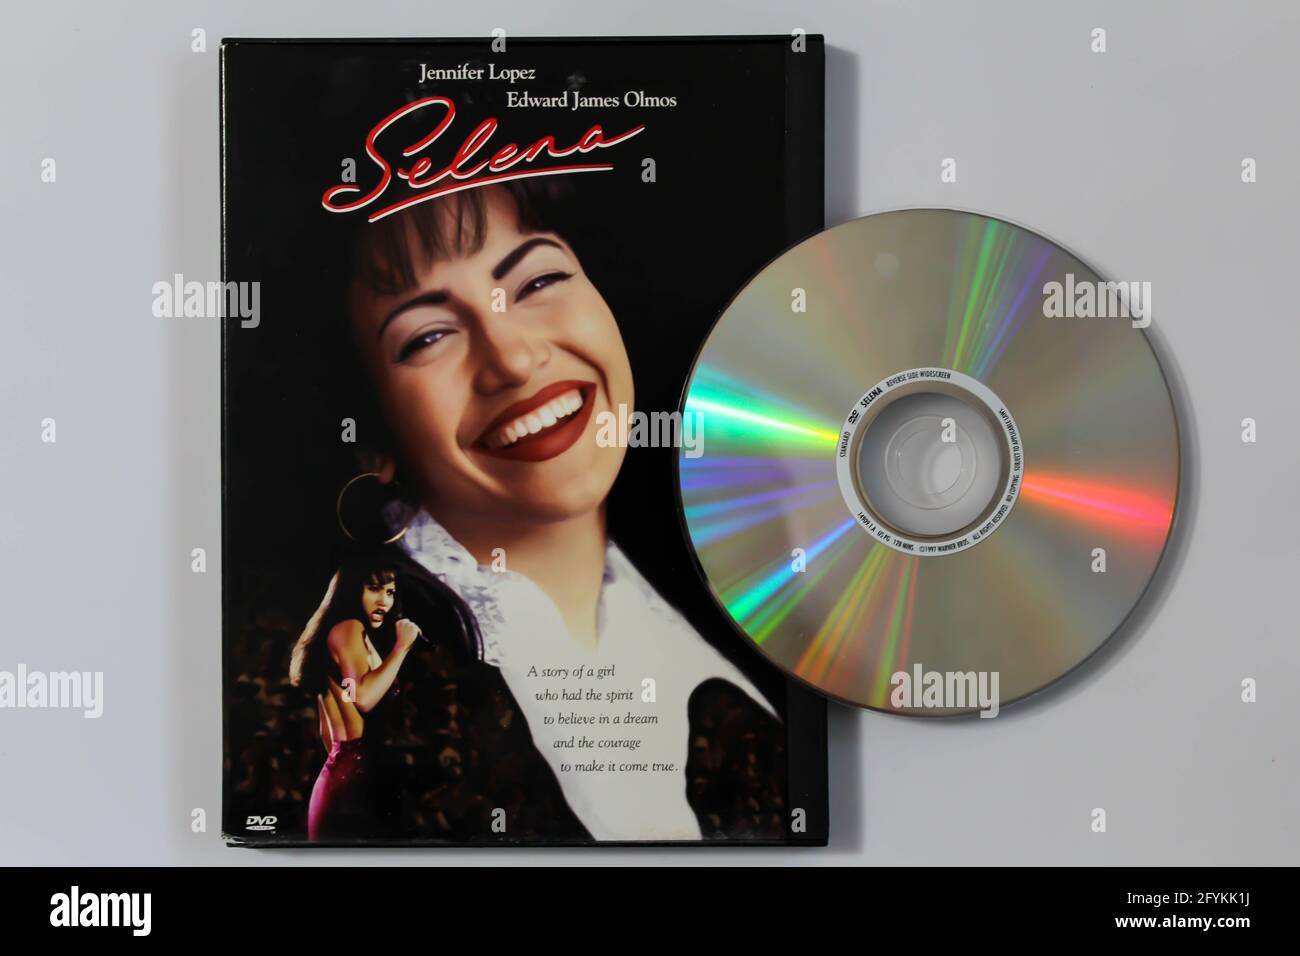 Selena is an American biographical musical drama film by Gregory Nava. It is about the life & career of Tejano musician Selena Quintanilla-Perez DVD Stock Photo